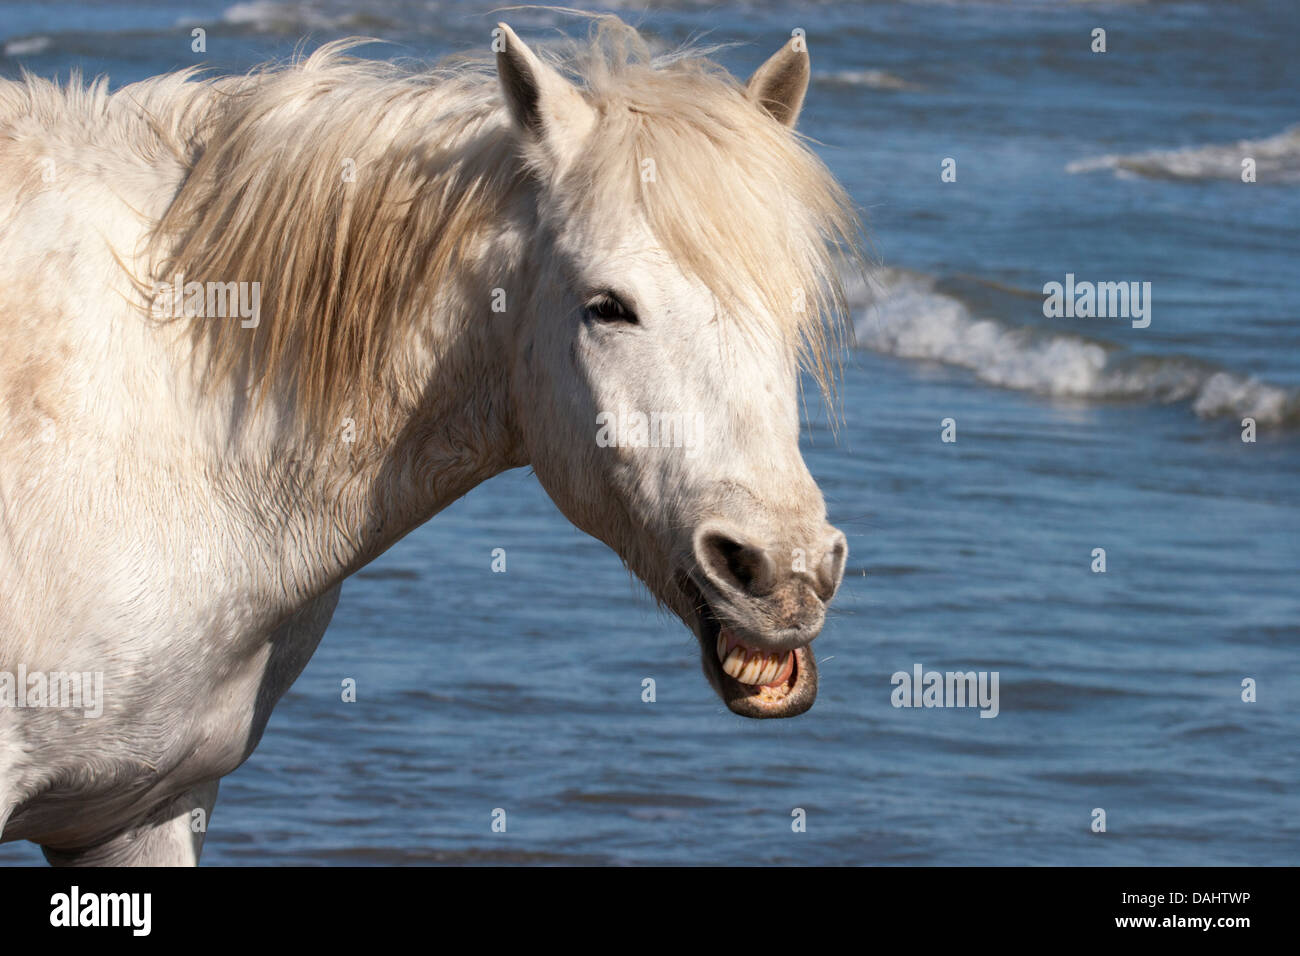 Camargue horse making funny face, showing teeth. France Stock Photo